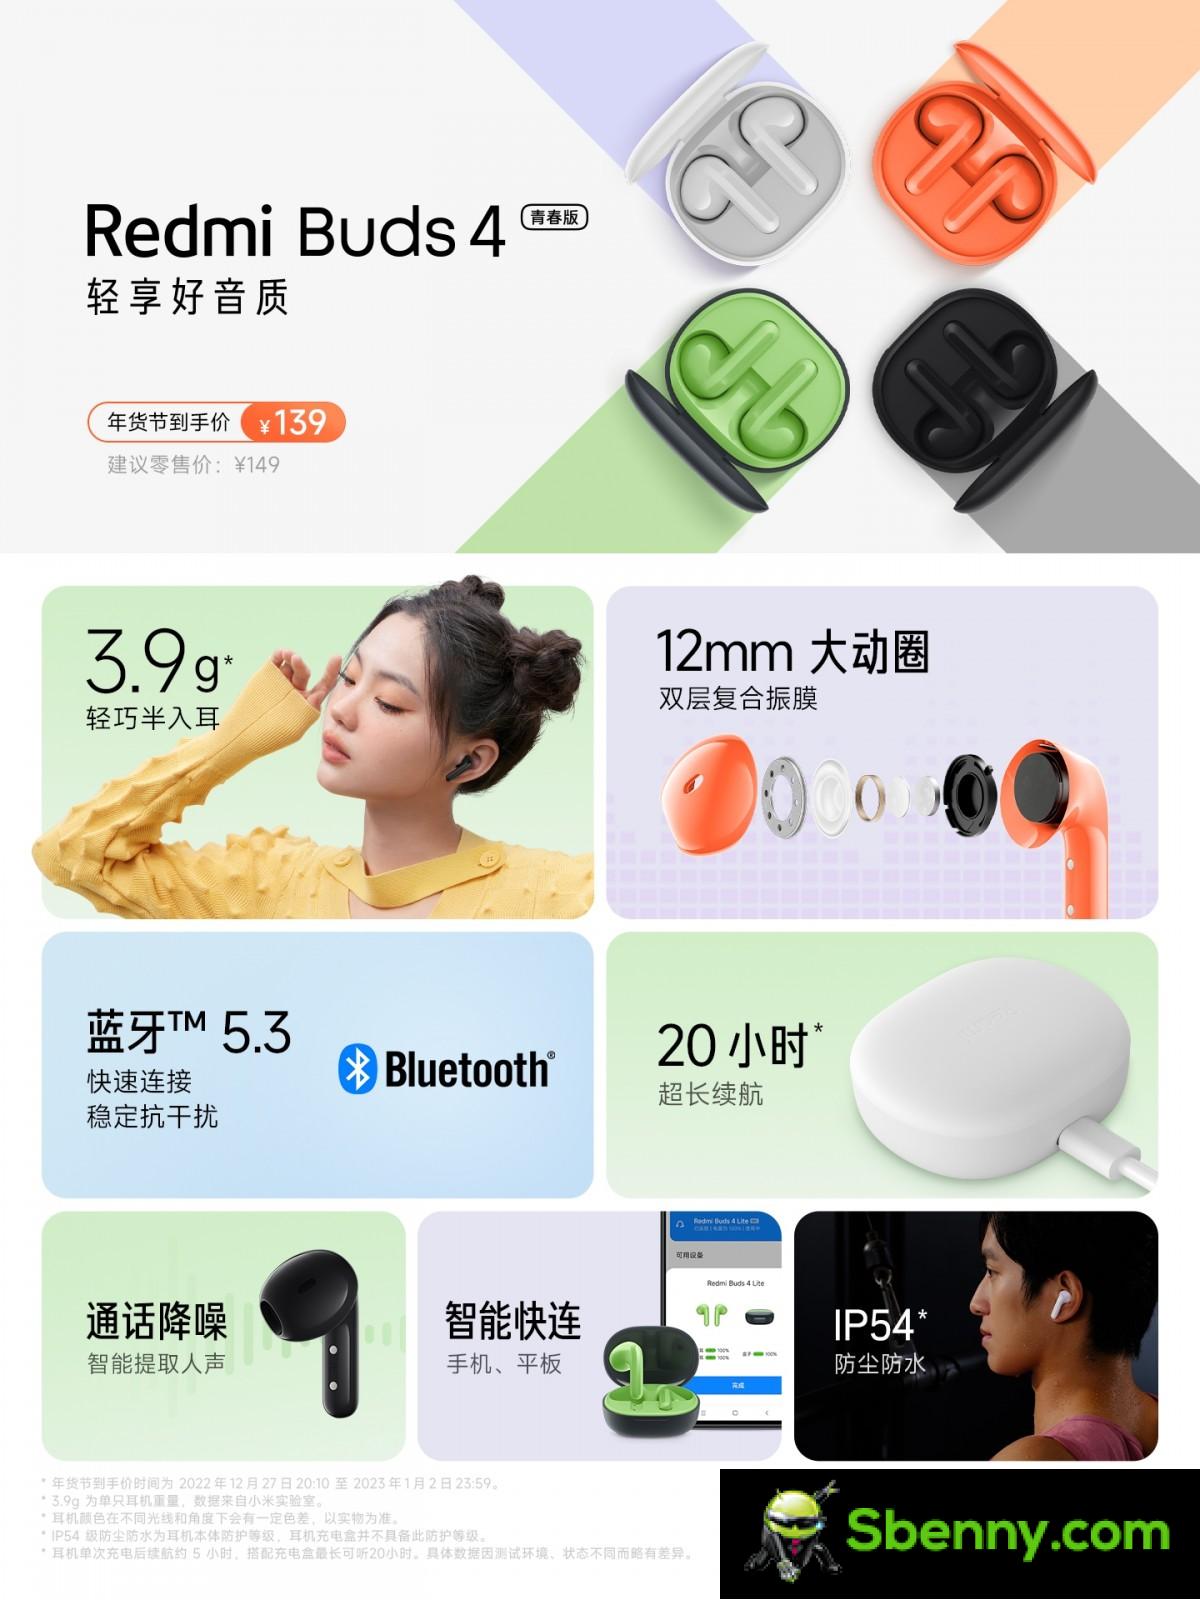 Redmi launches Watch 3, Band 2 and Buds 4 Lite in jubilant colors